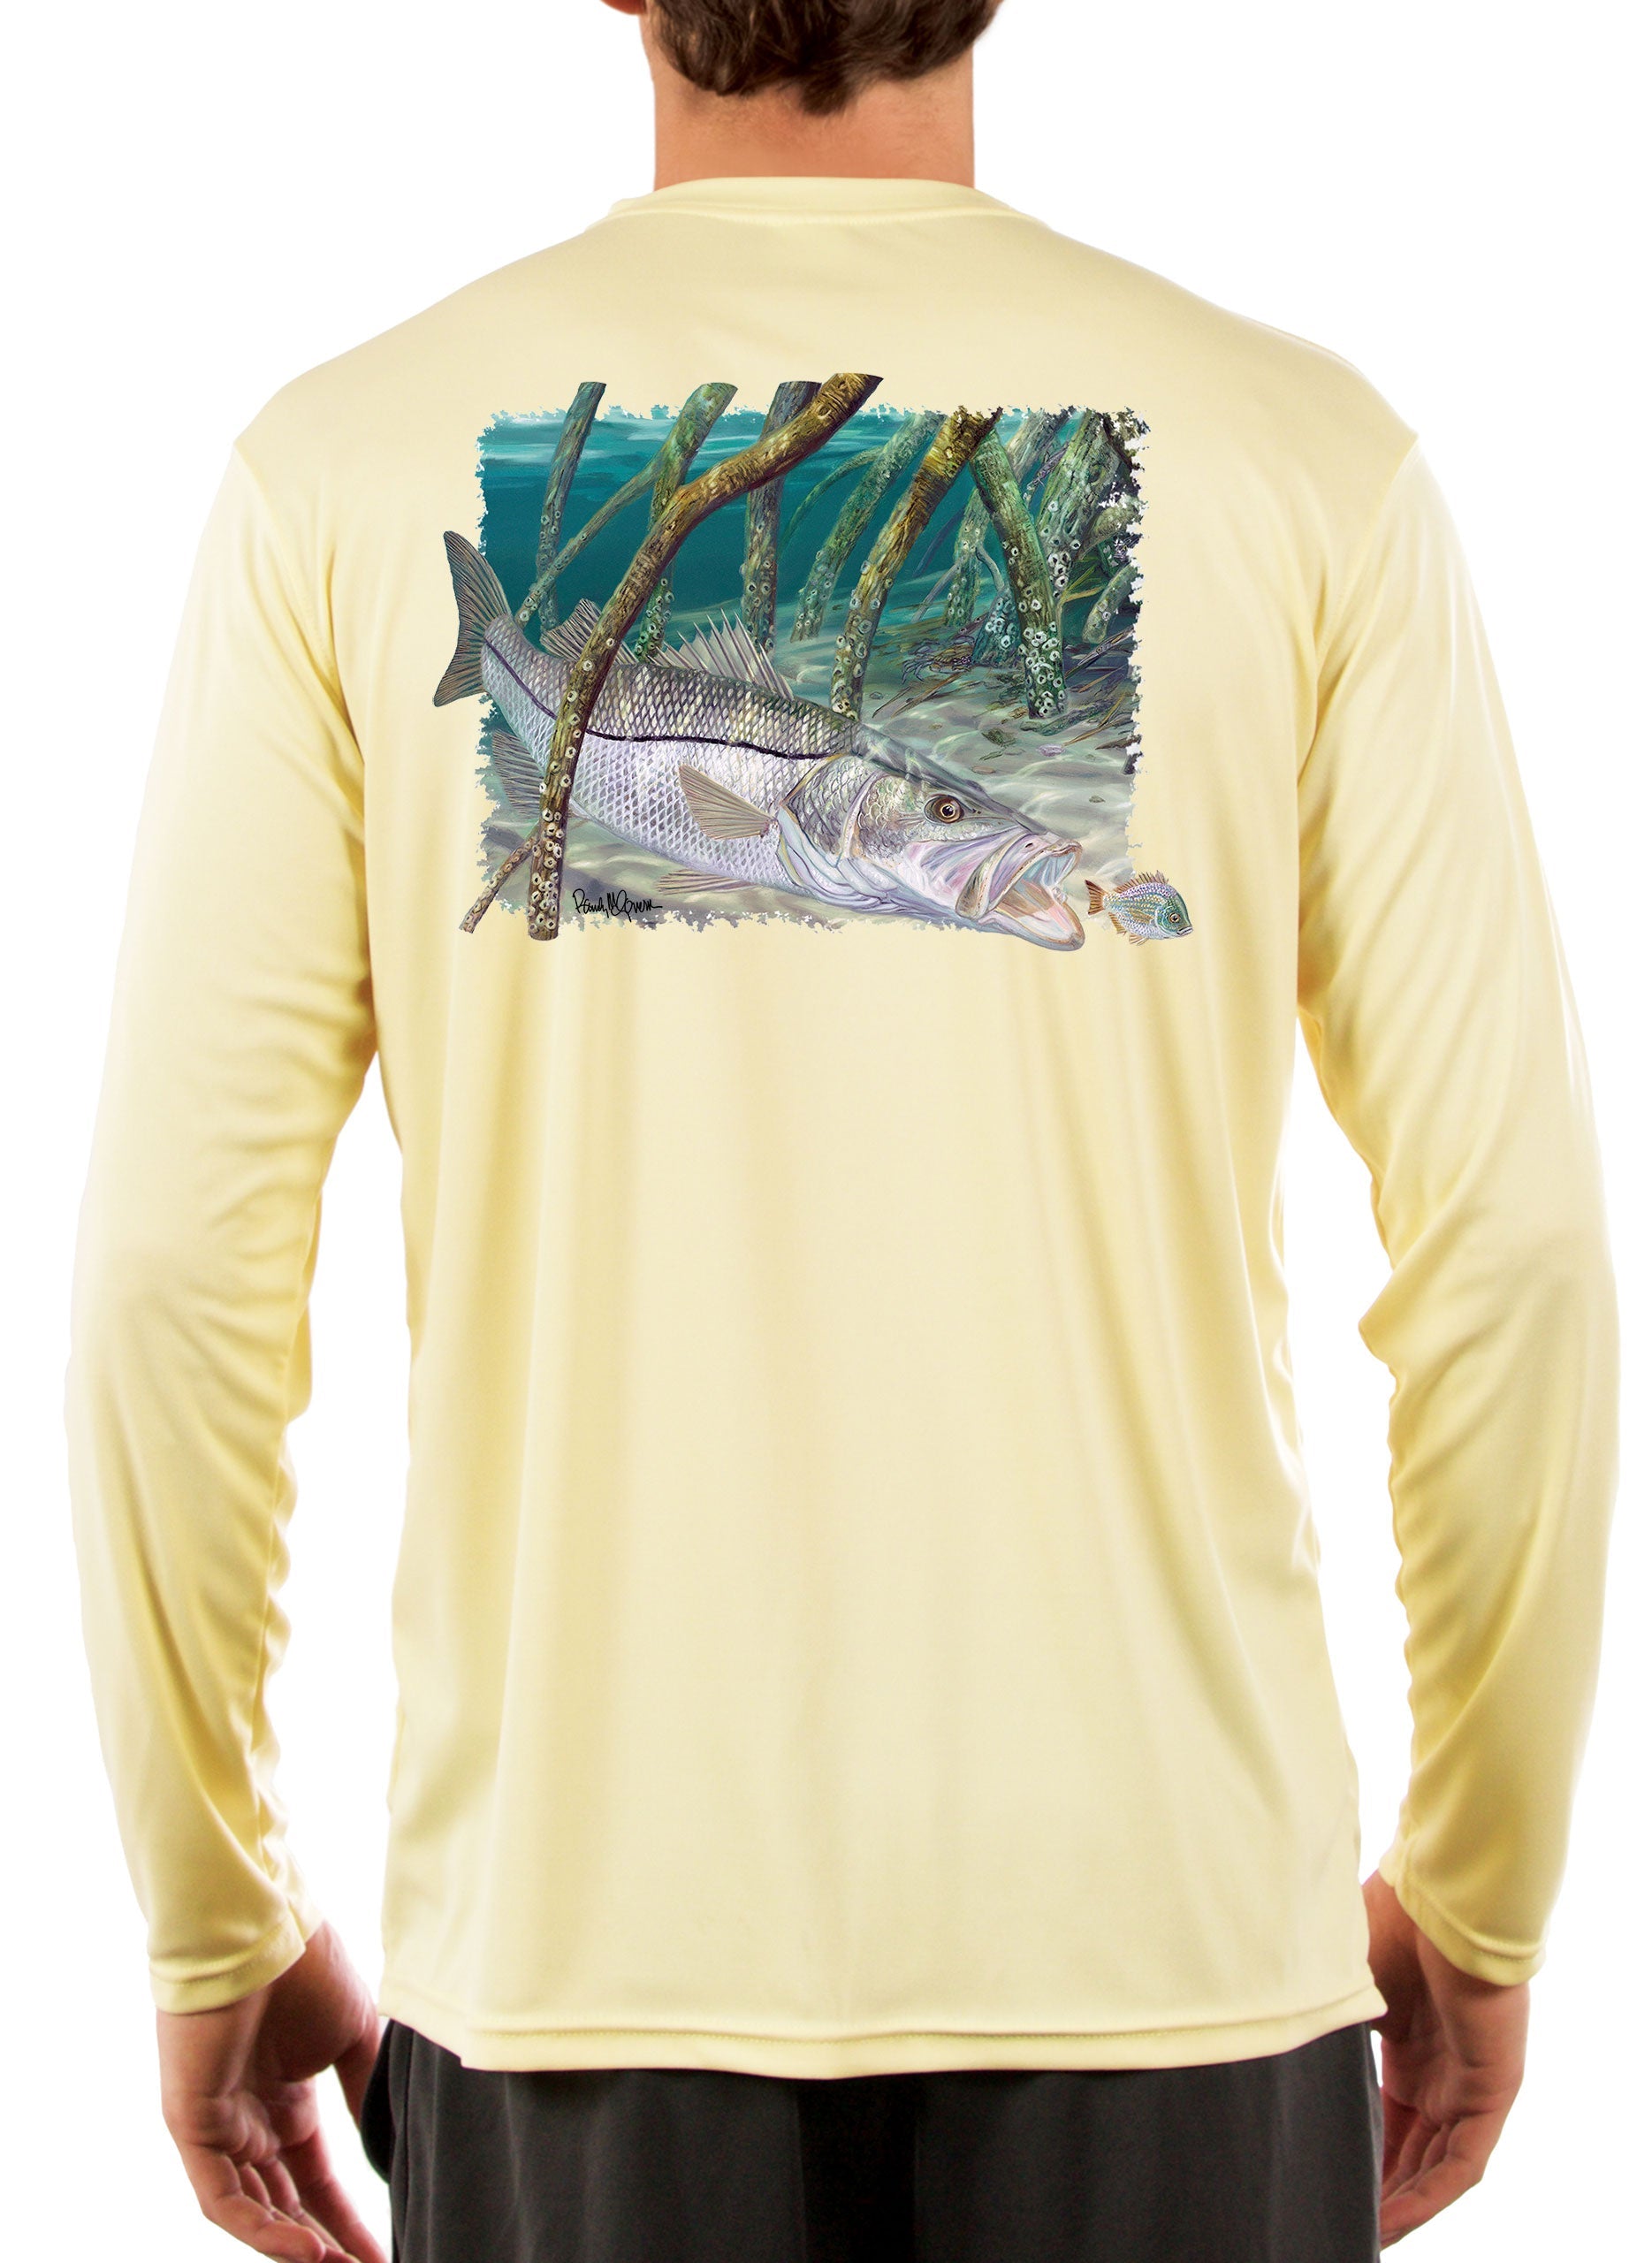 NEW ARTWORK] Fishing Shirts For Men Snook Fish in Mangroves with Snoo –  Skiff Life